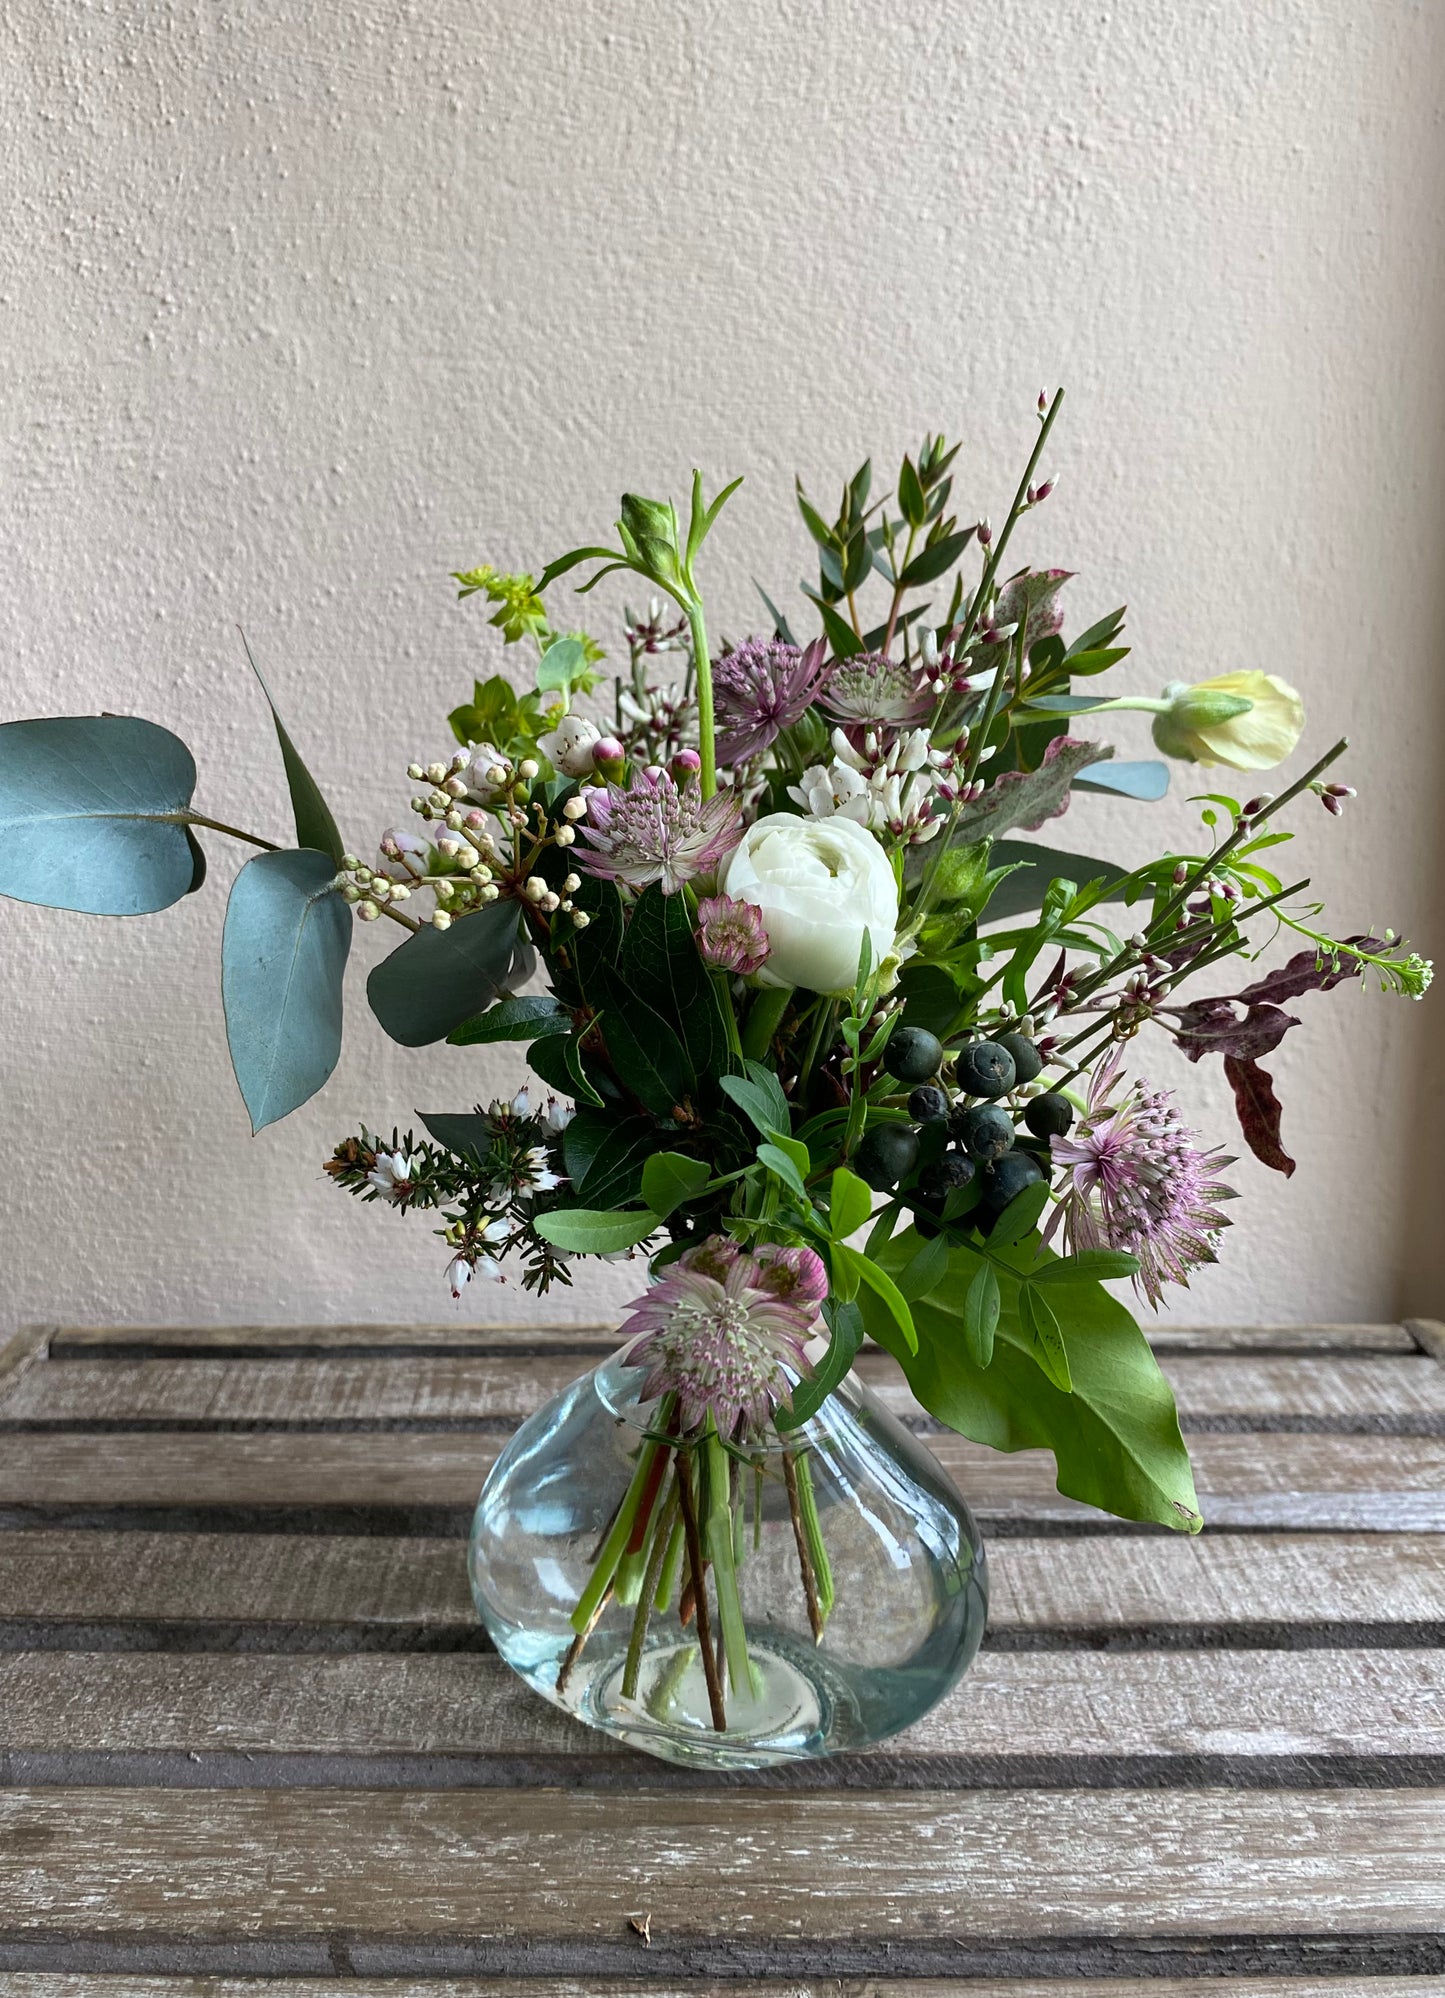 Little Clear Vase - including a posy of seasonal flowers